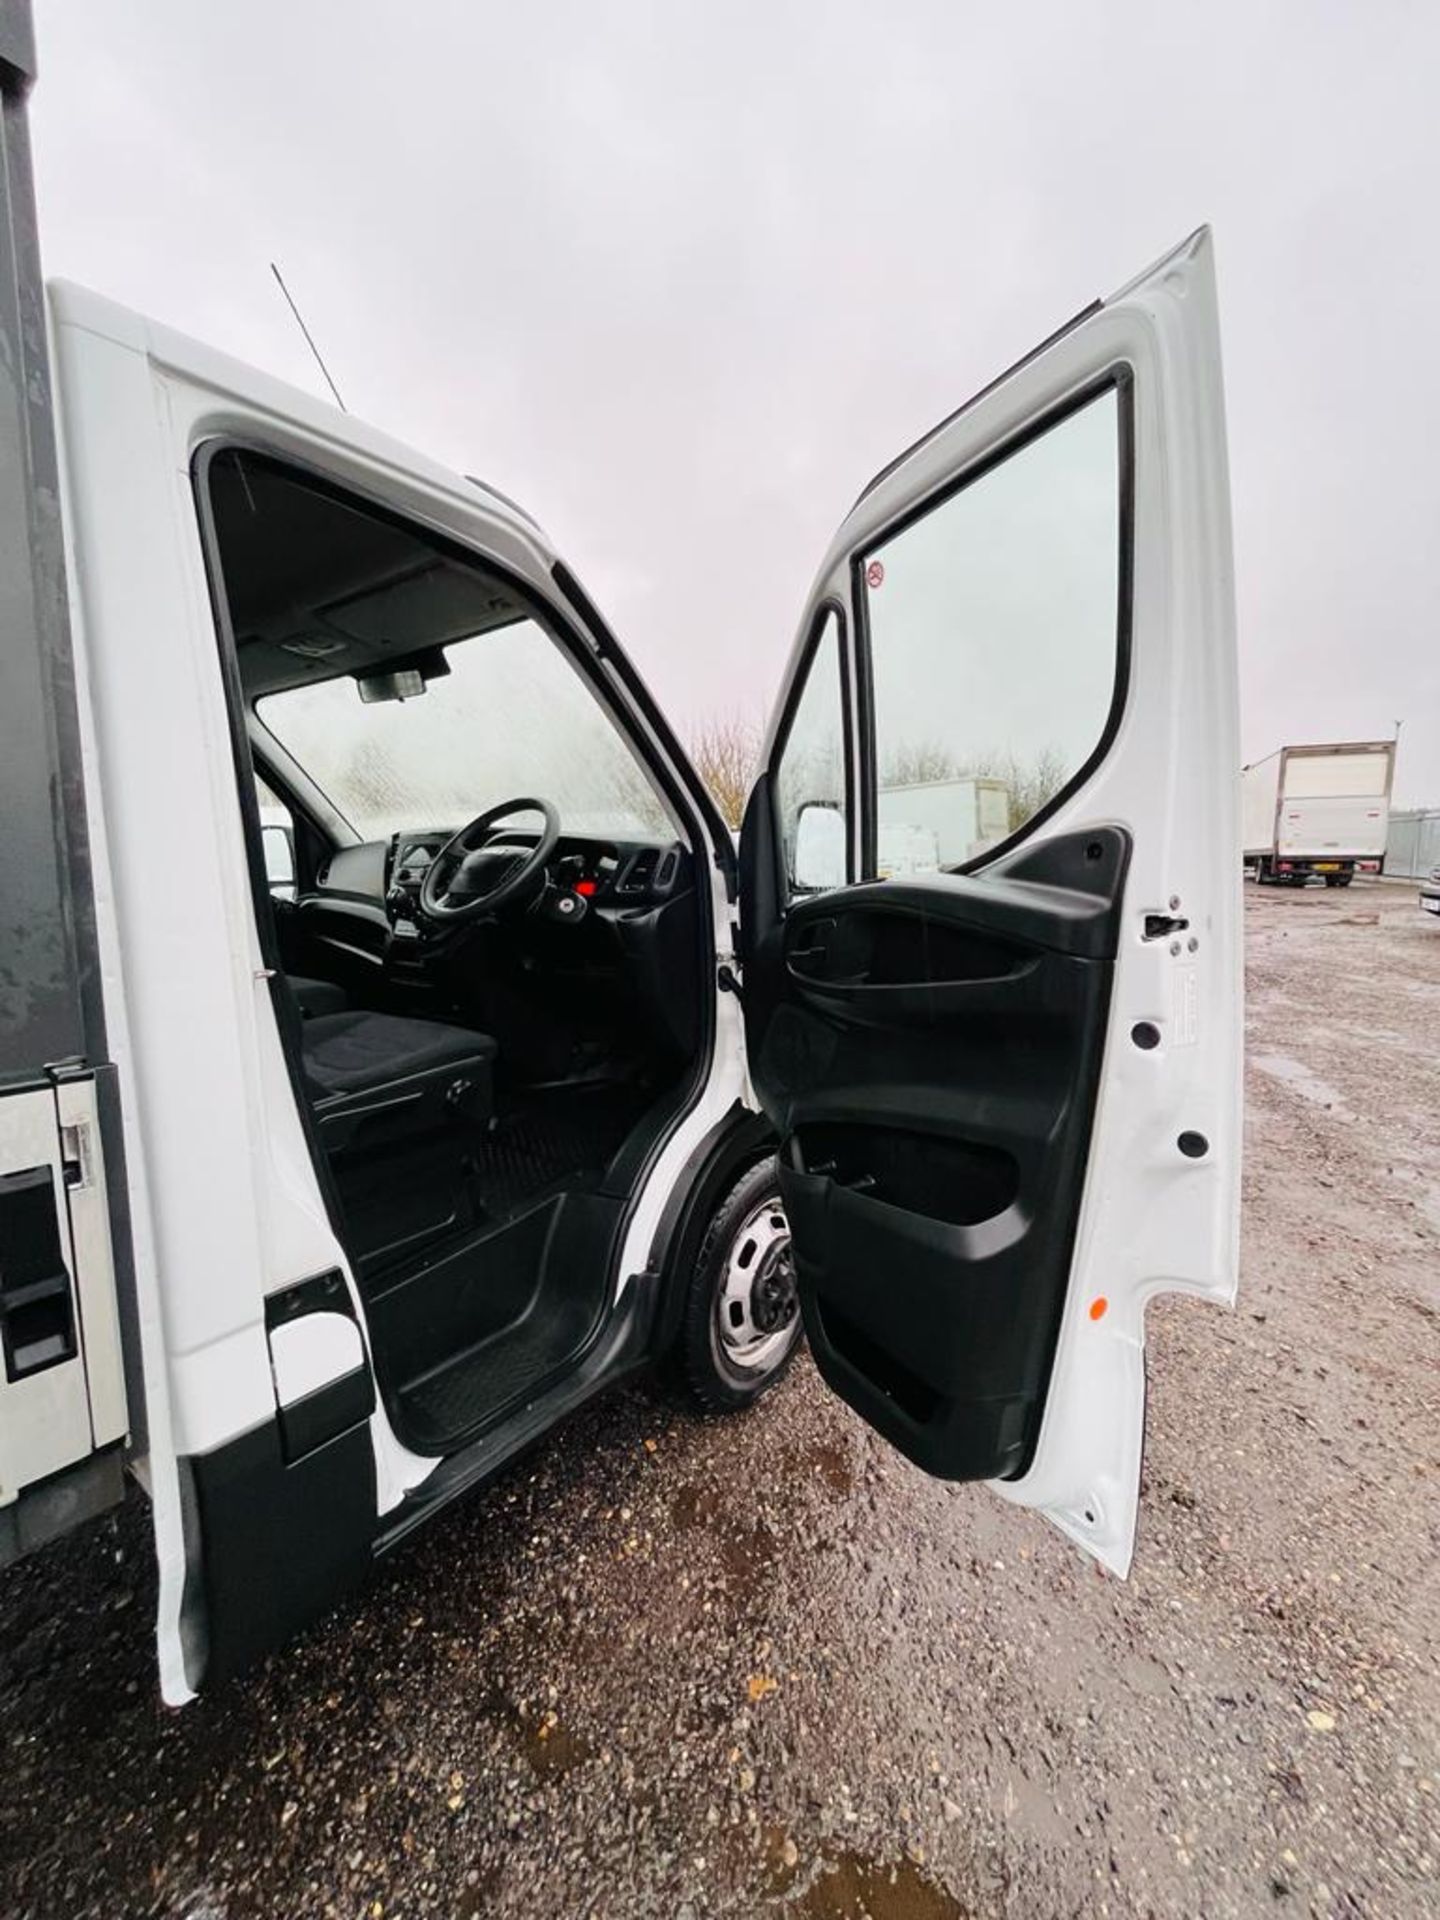 ** ON SALE **Iveco Daily 35C14 2.3 HPI 2018 '68 Reg' Alloy Dropside - ULEZ Compliant - Image 10 of 20